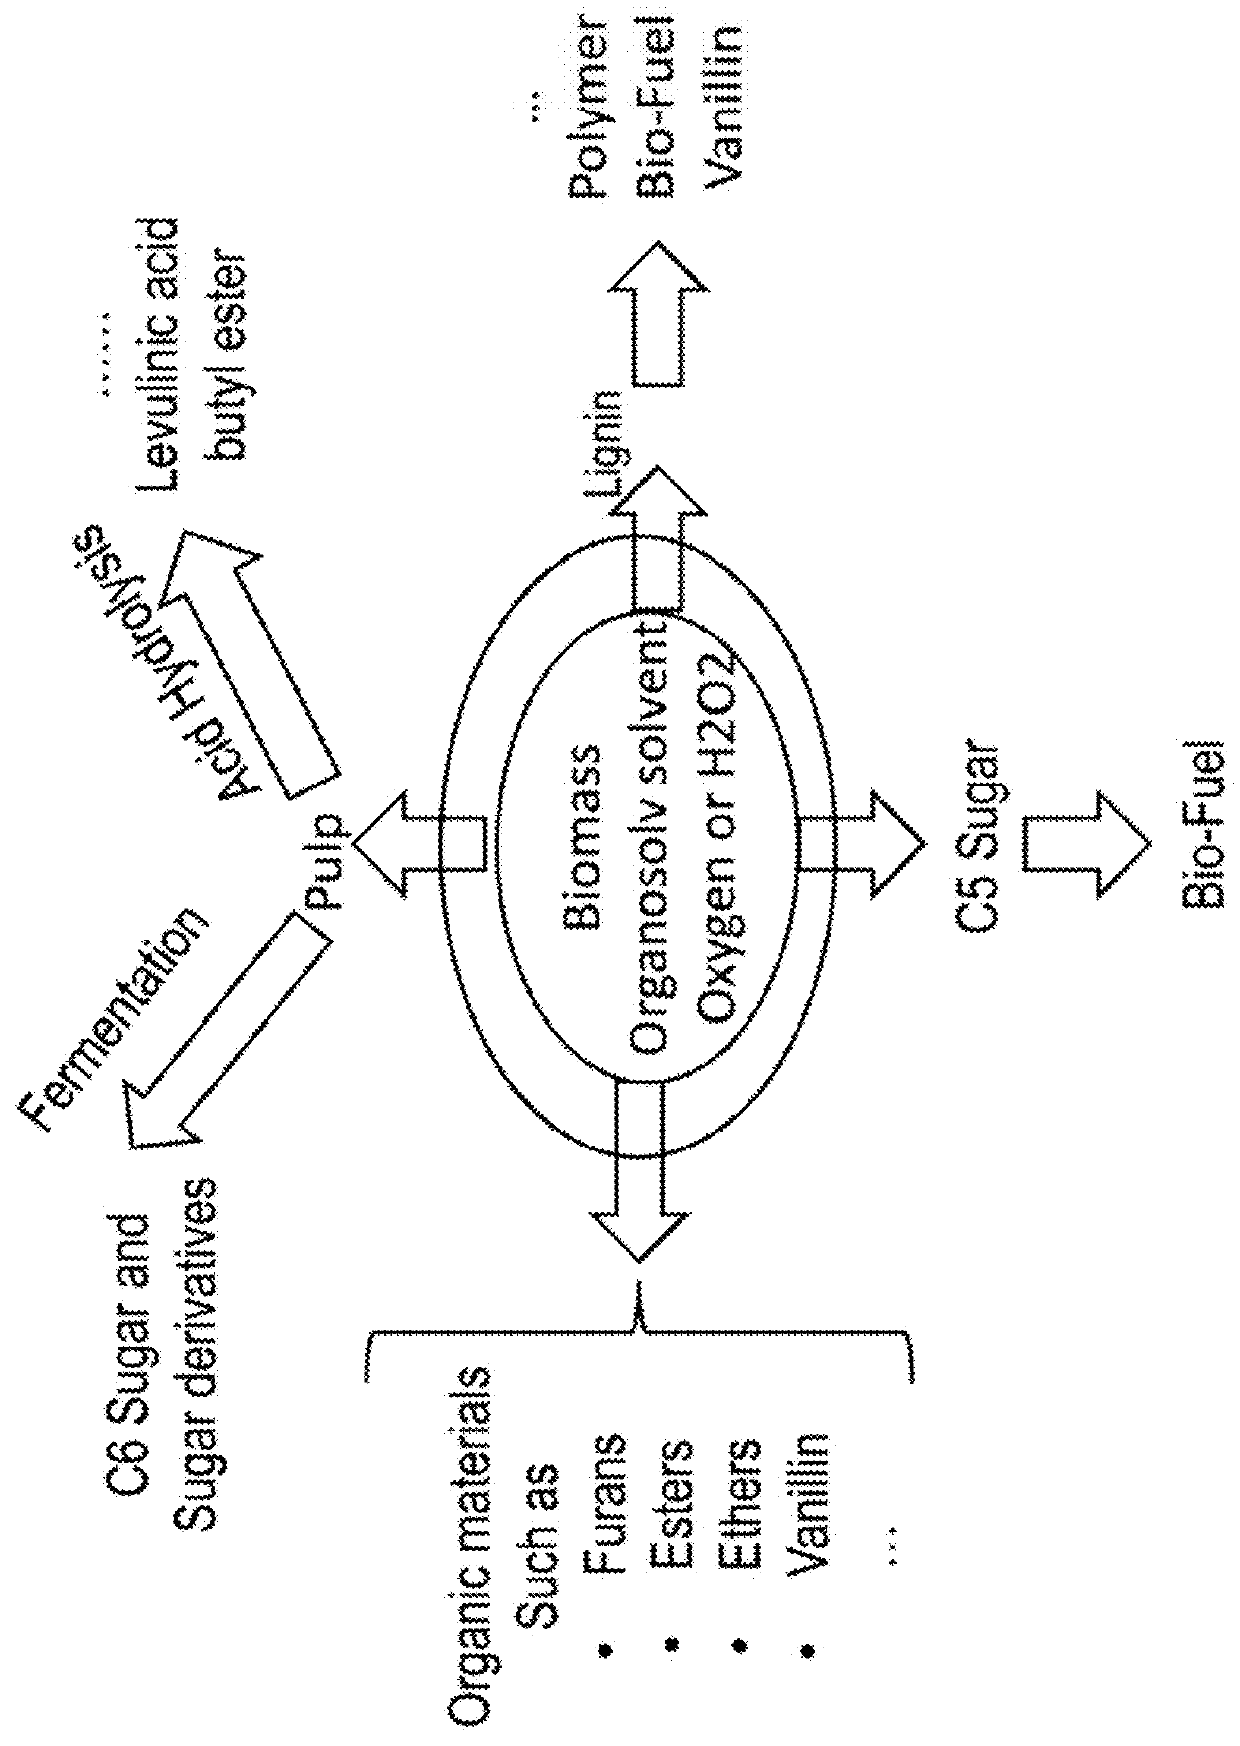 Oxygen assisted organosolv process, system and method for delignification of lignocellulosic materials and lignin recovery